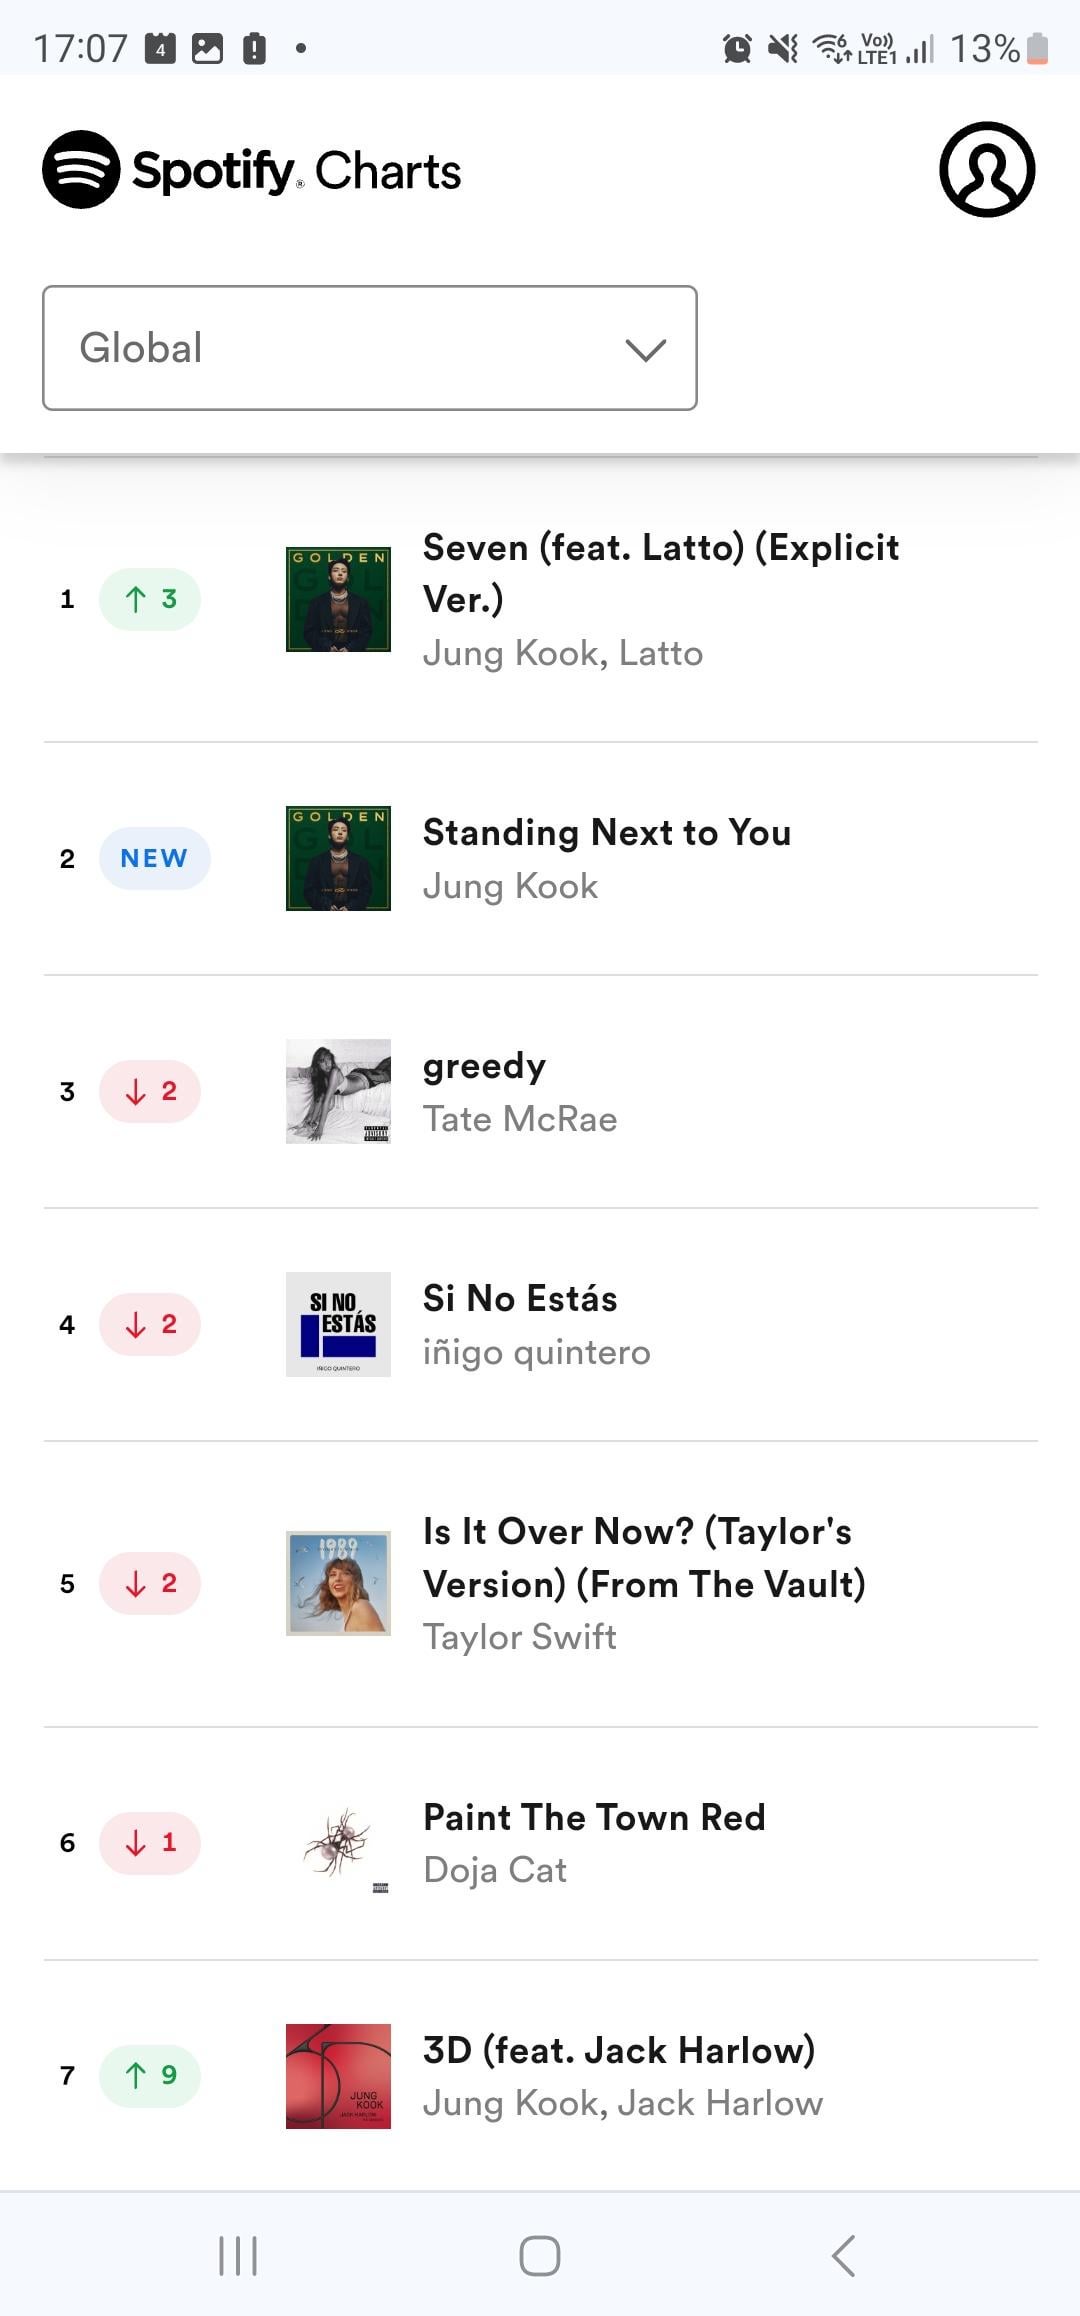 231104 Spotify Daily Top Songs Global: Jung Kook's "Seven" rises to #1, "Standing Next to You" debuts at #2, "3D" goes up to #7